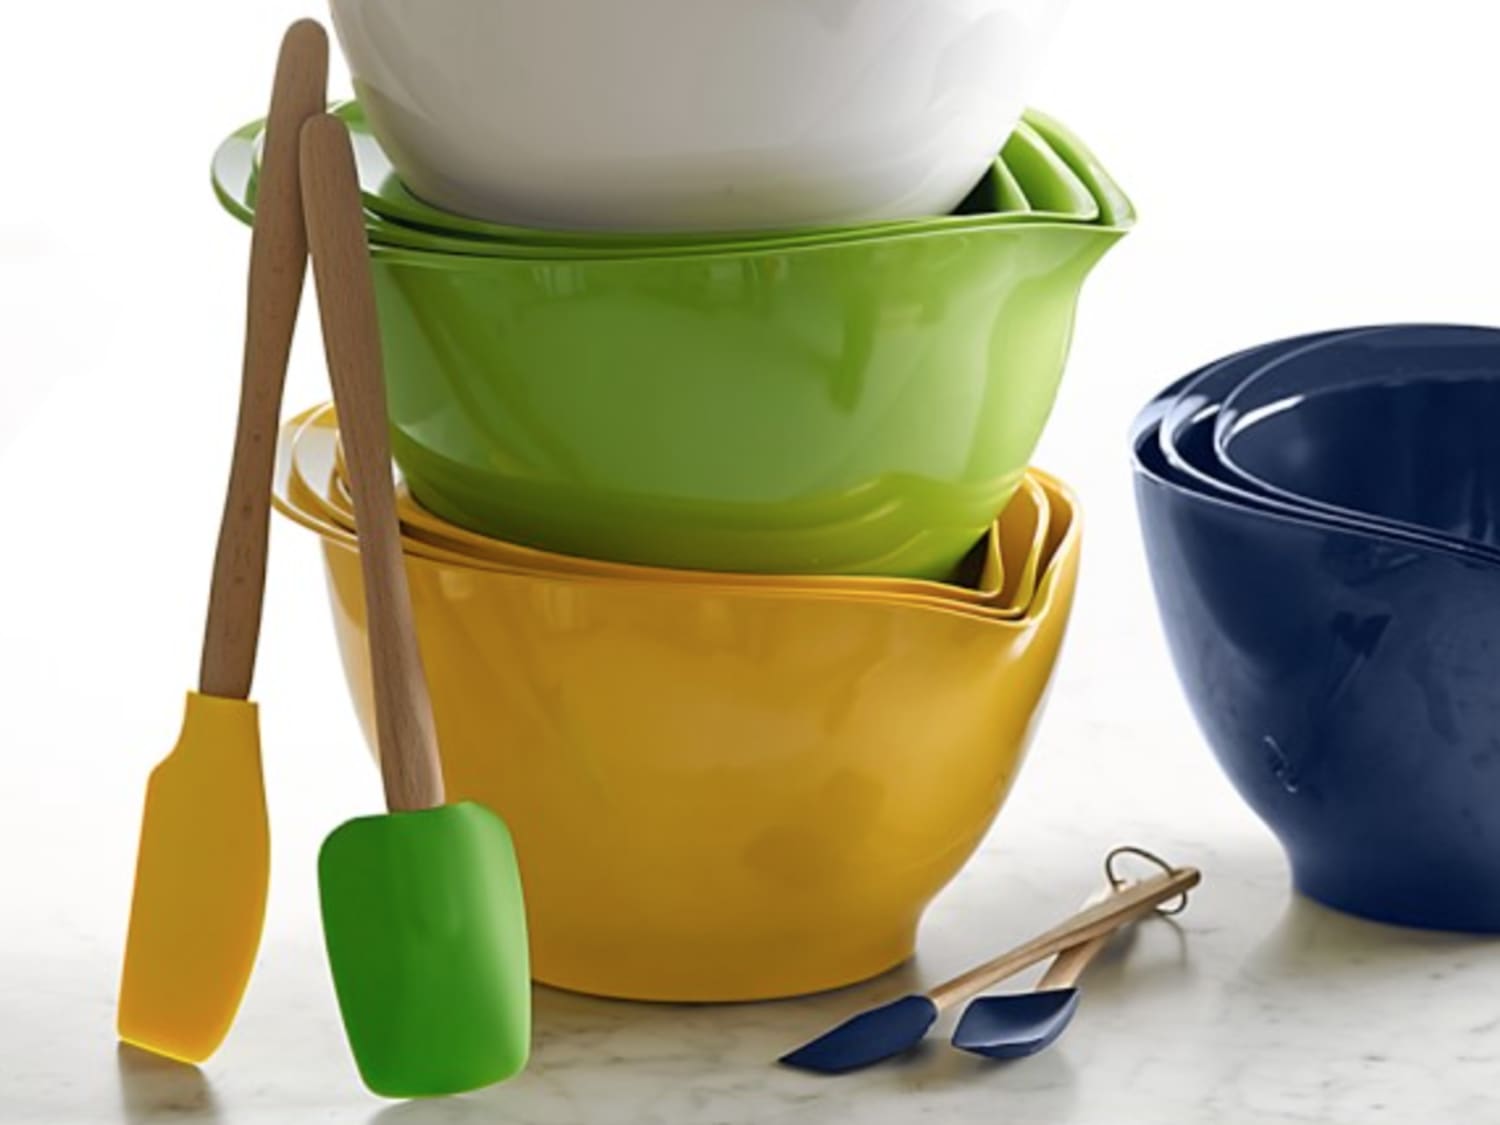 Mixing Bowls, The mixing bowl for your mixer